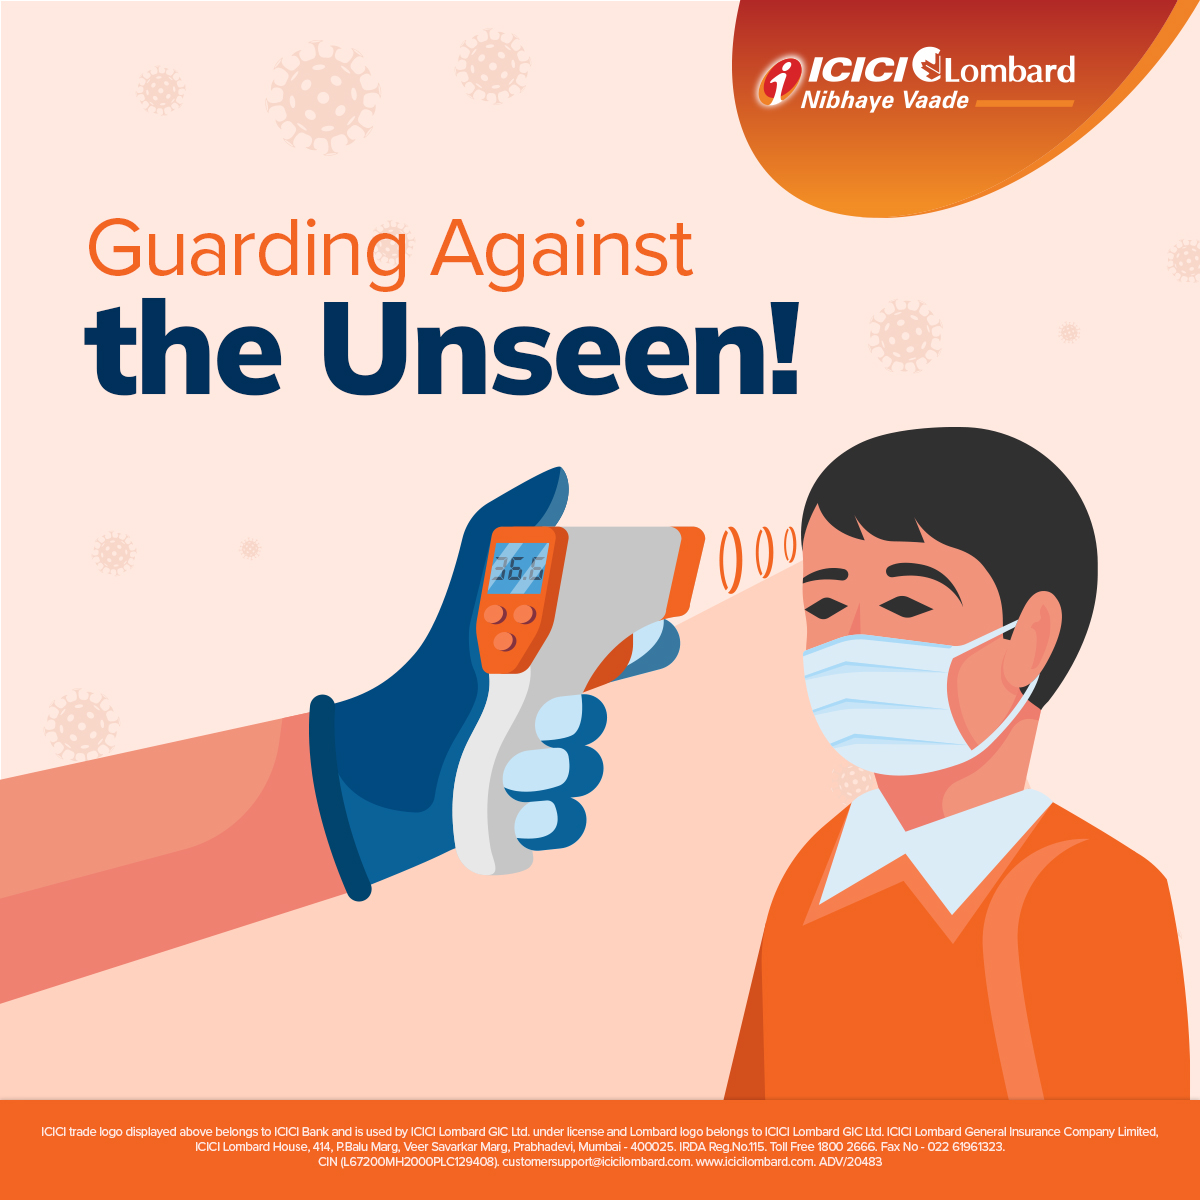 Your temperature check isn't just a number; it's a crucial defense against invisible threats. Make sure to wear a mask in case of a high temperature. #ICICILombard #NibhayeVaade #CovidSafety